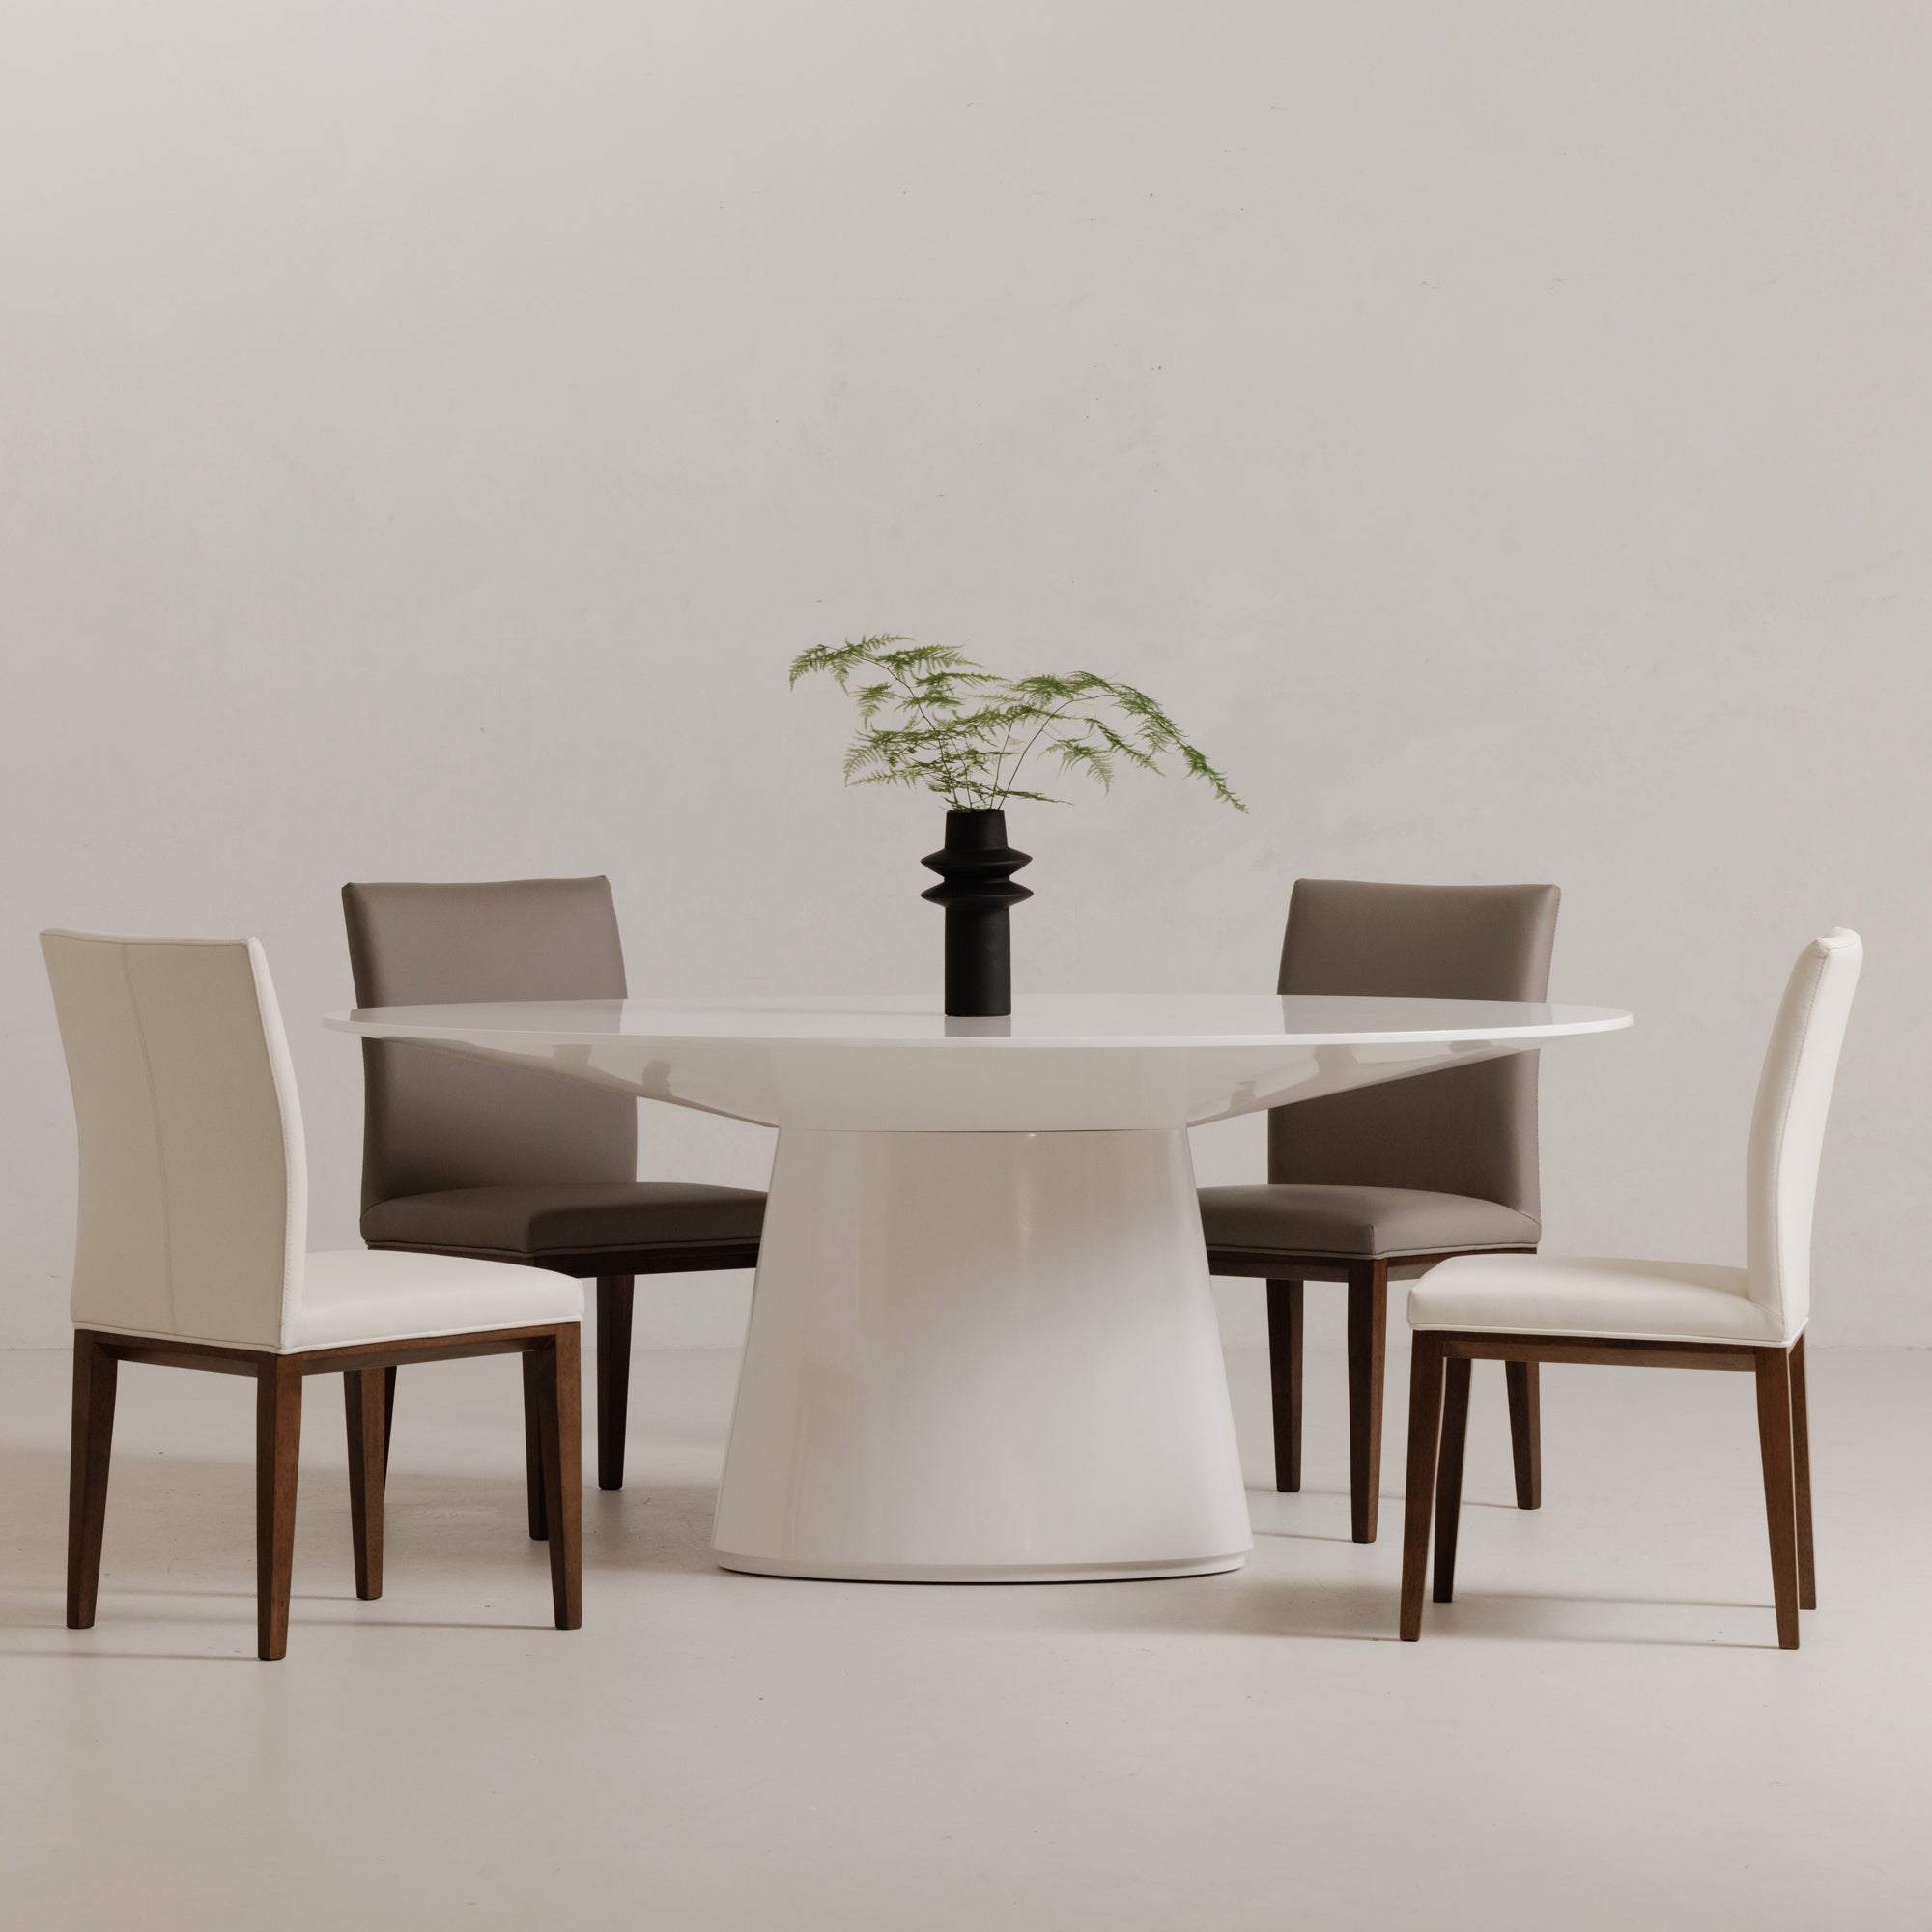 Frankie Dining Chair Grey - Set Of Two